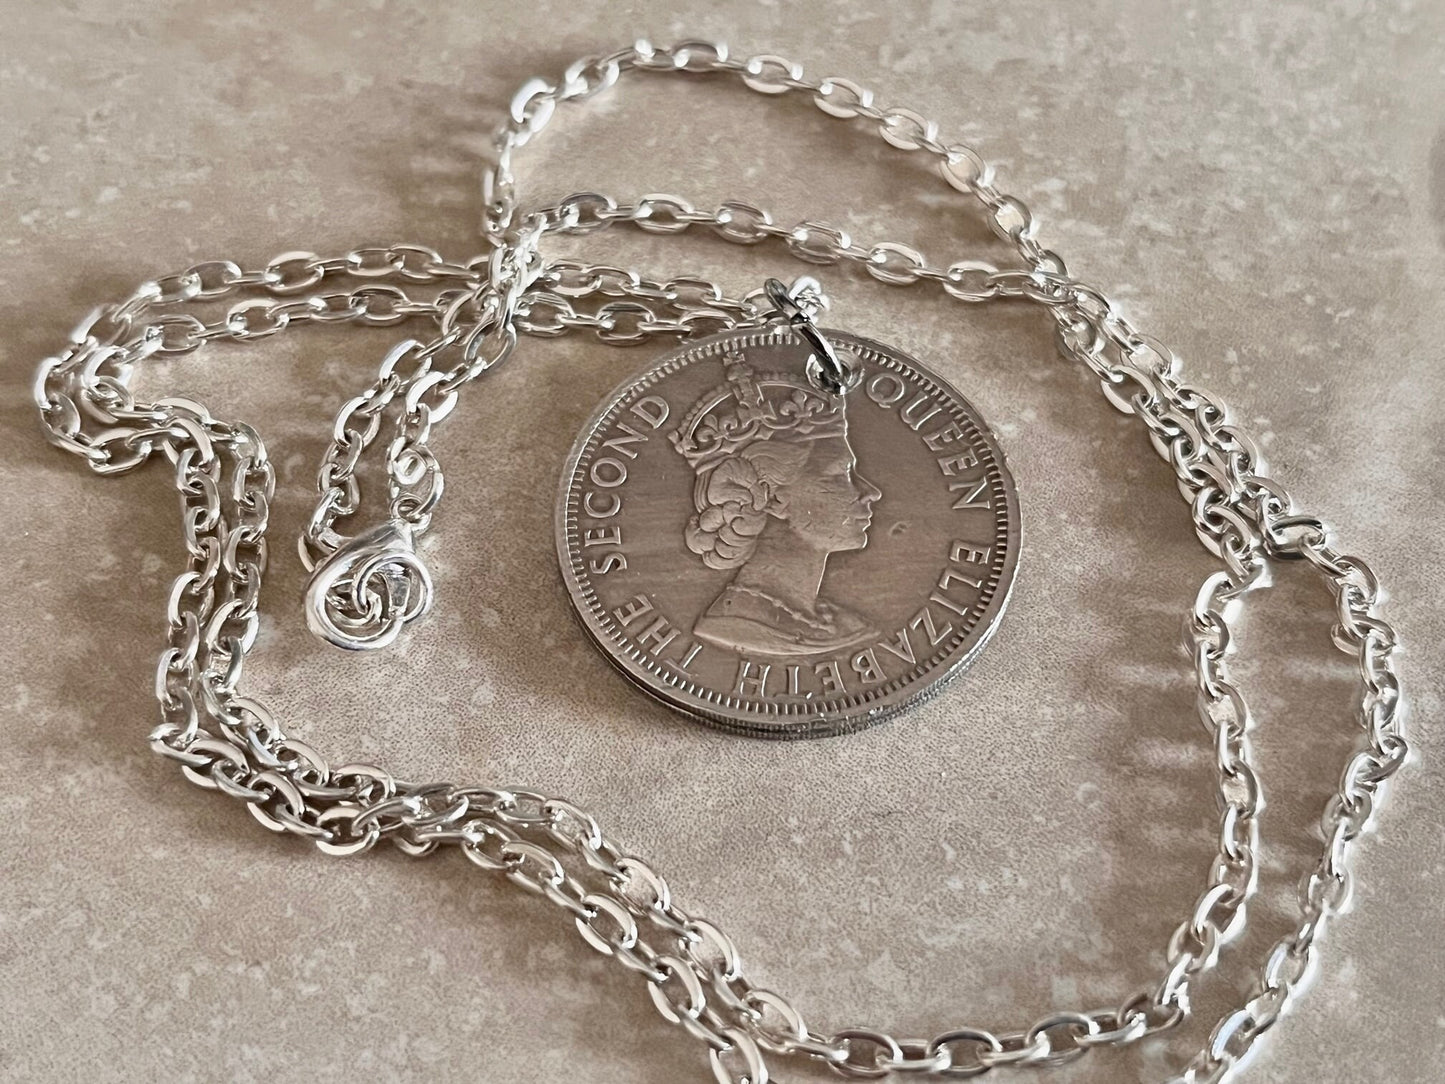 Malaya & British Borneo Coin Necklace 50 Cents Pendant Personal Vintage Handmade Jewelry Gift Friend Charm For Him Her World Coin Collector